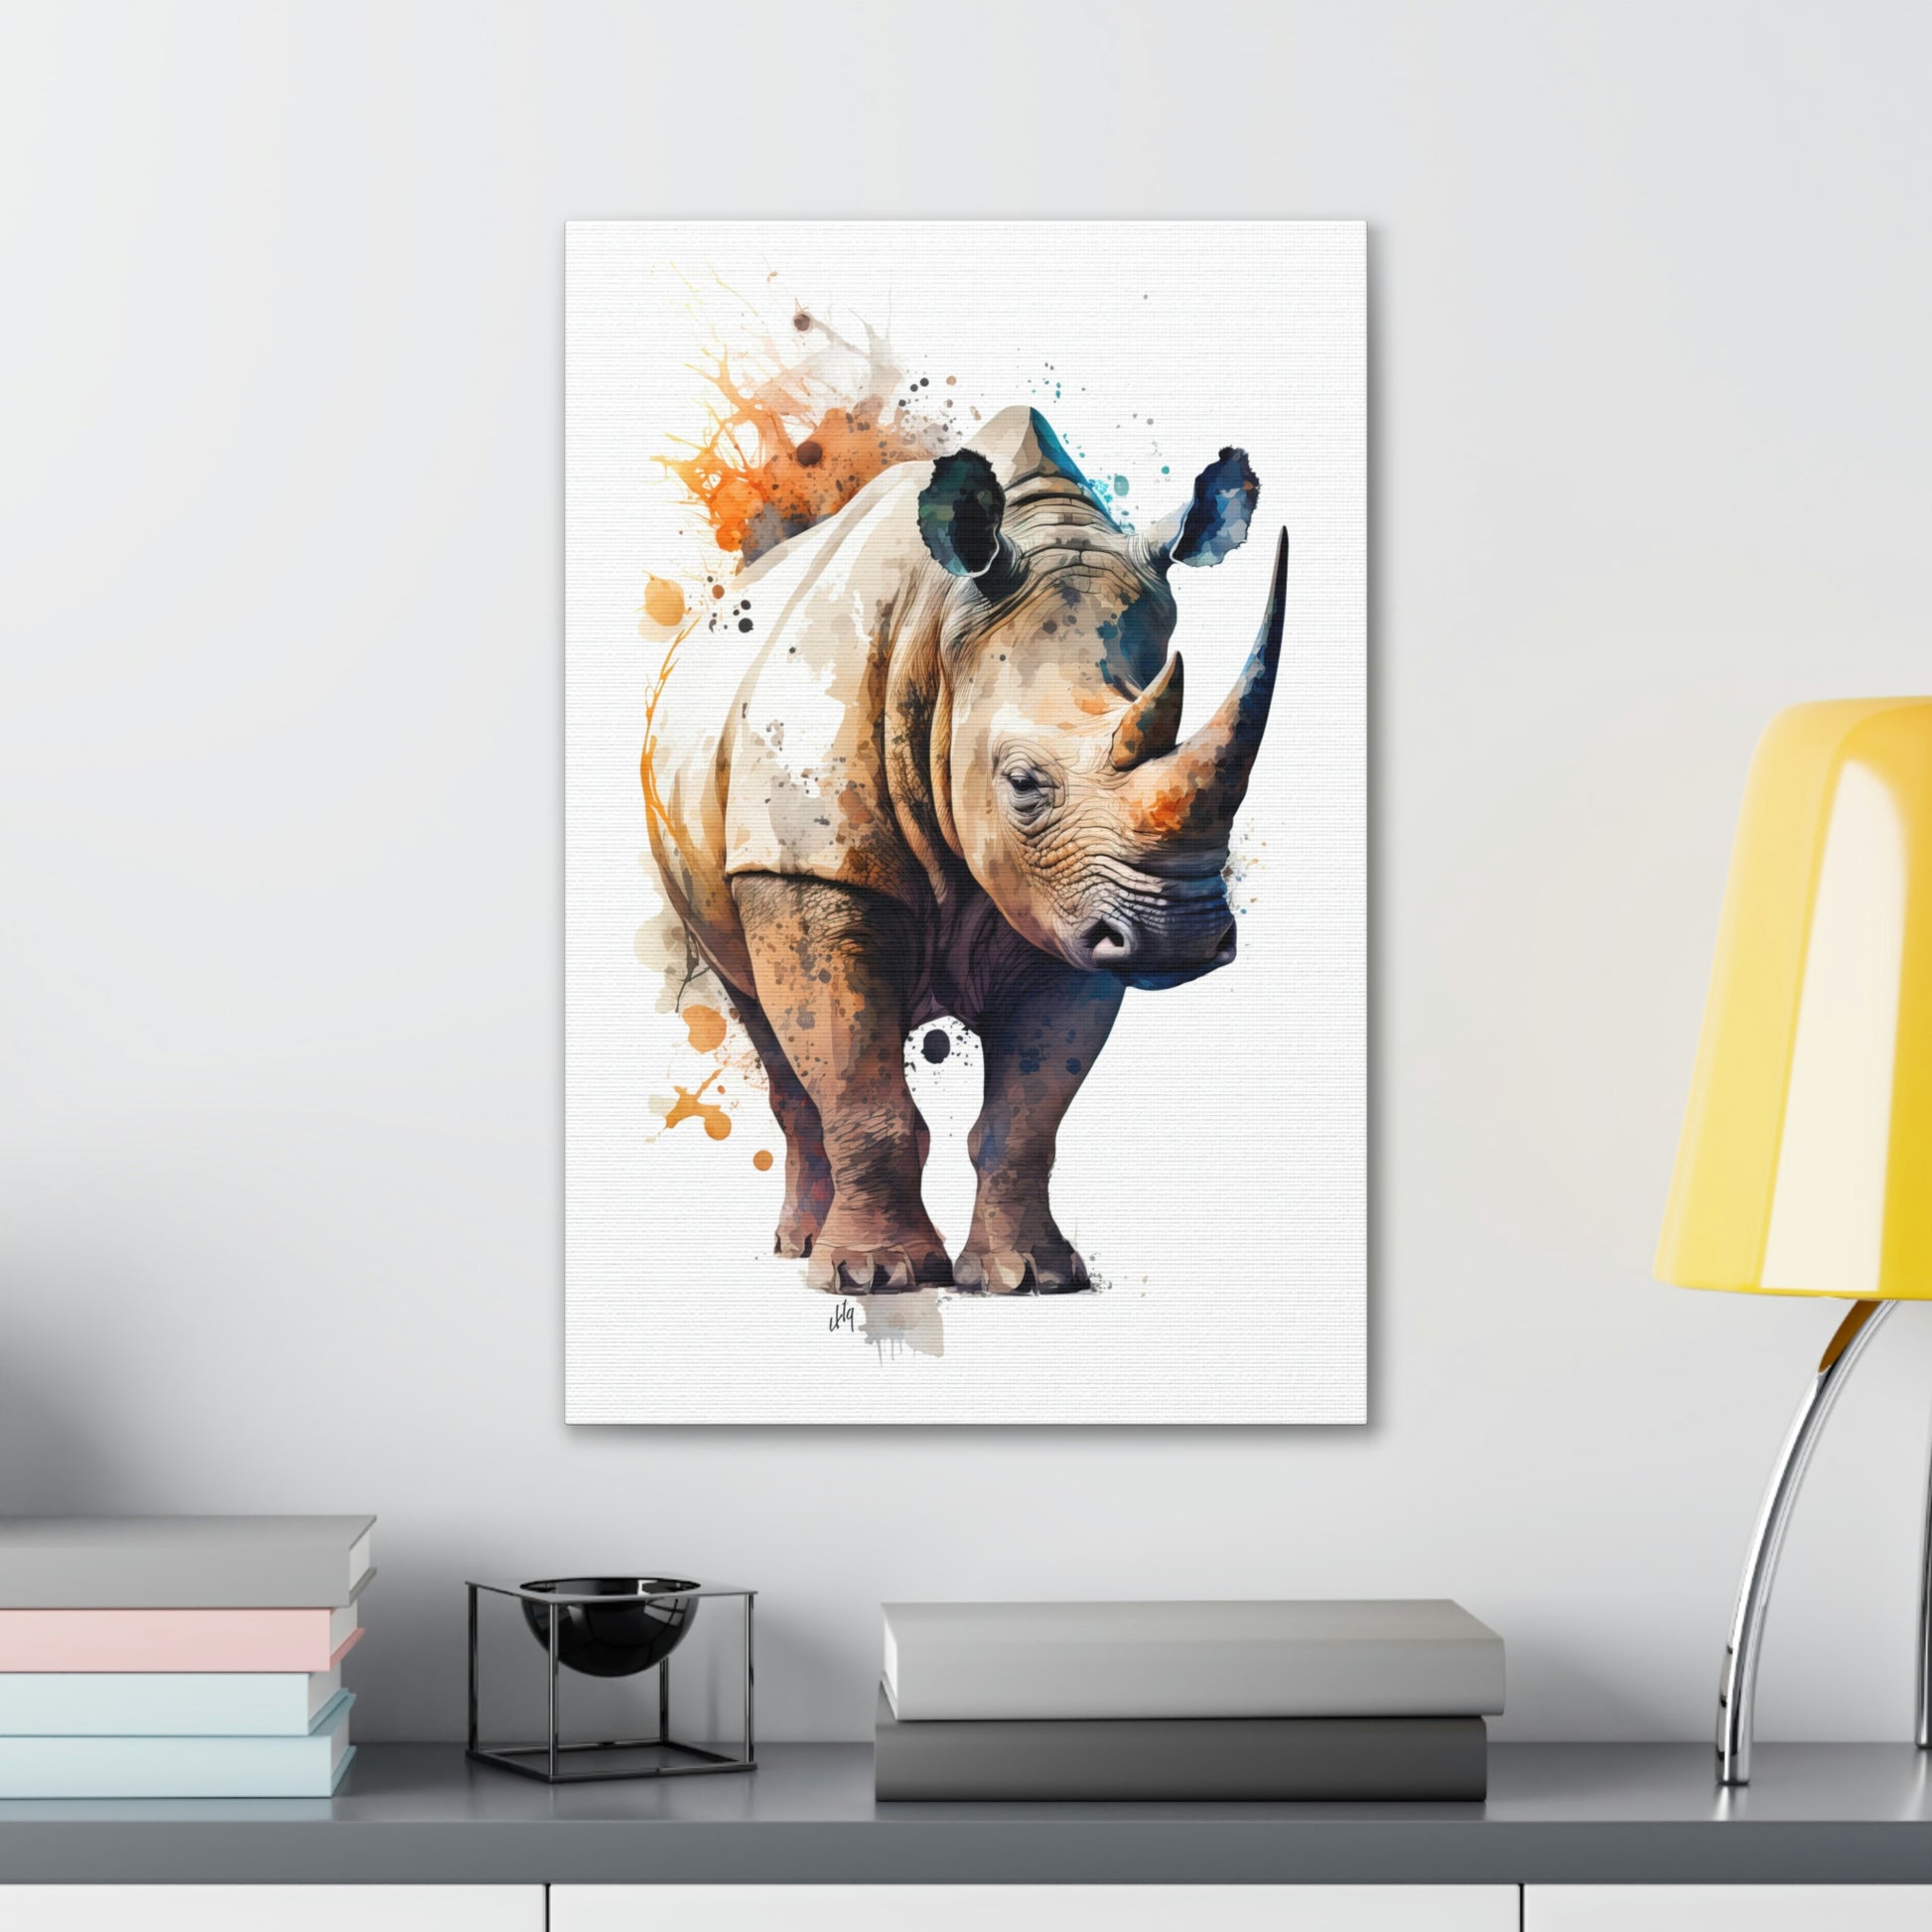 Rhinoceros Wall Art from the Wildlife Collection presents the dignified and powerful stance of this magnificent beast on canvas. Its subtle yet compelling depiction offers a thoughtful nod to nature's grandeur, making it a refined choice for any space looking to echo the majesty of the natural world.